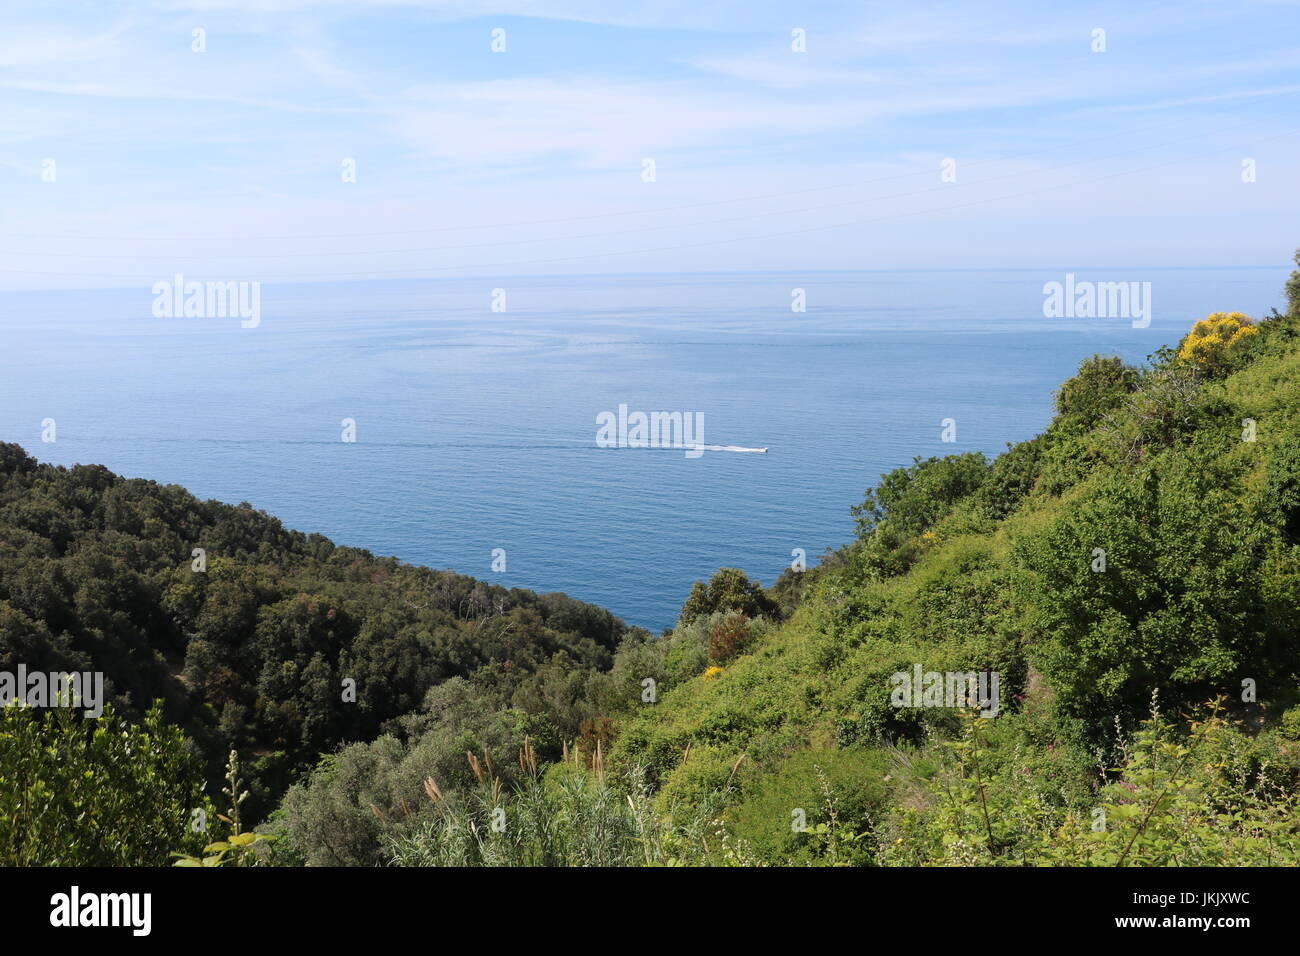 Clear blue sea and sky with a boat speeding across the landscape view seen from a trekking trail between the villages in Cinque Terre, Italy Stock Photo